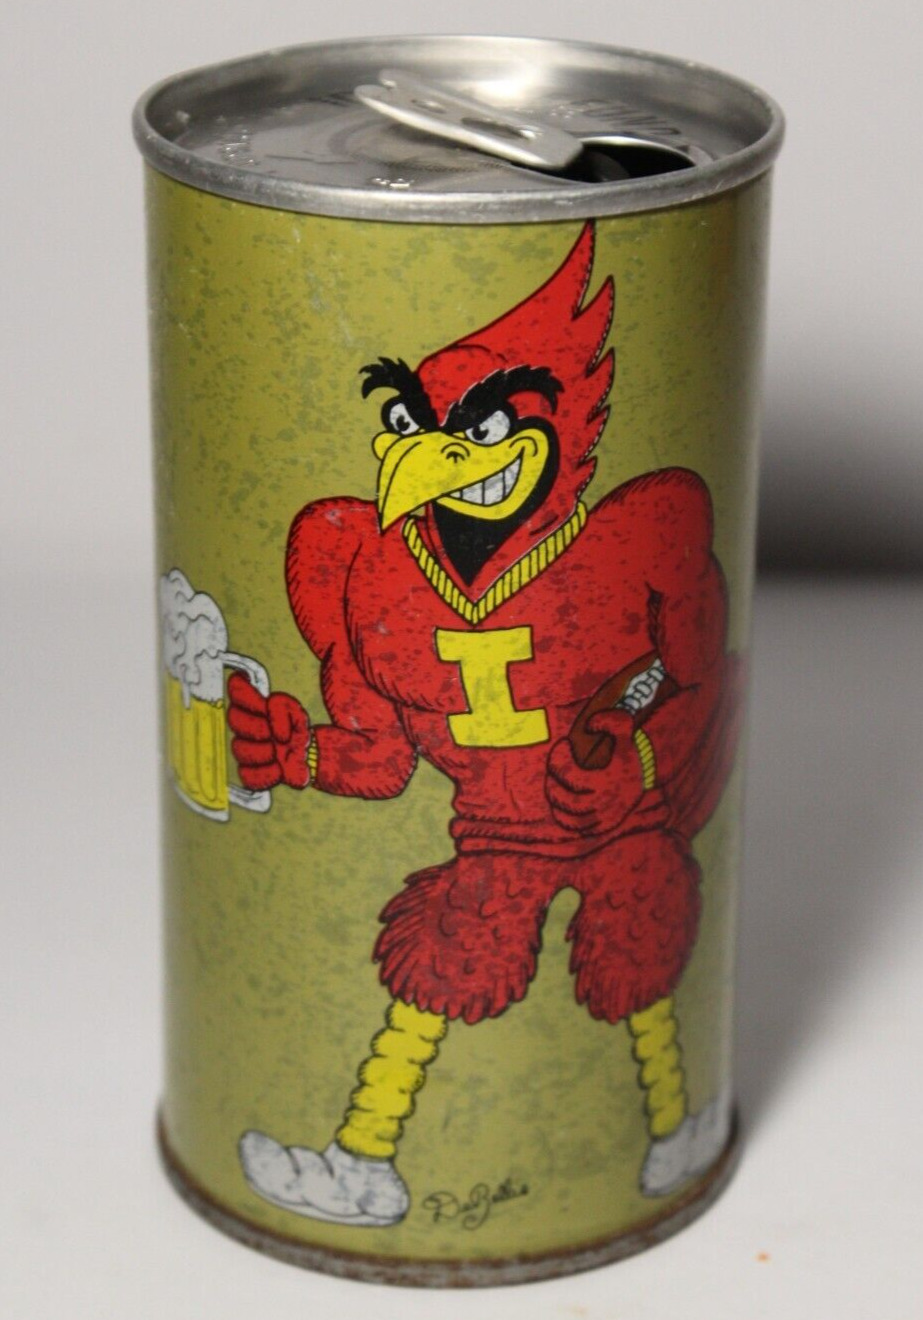 Vintage 1980 Iowa State Cyclones Beer Can Iowa State Football Iowa Beer Can USA